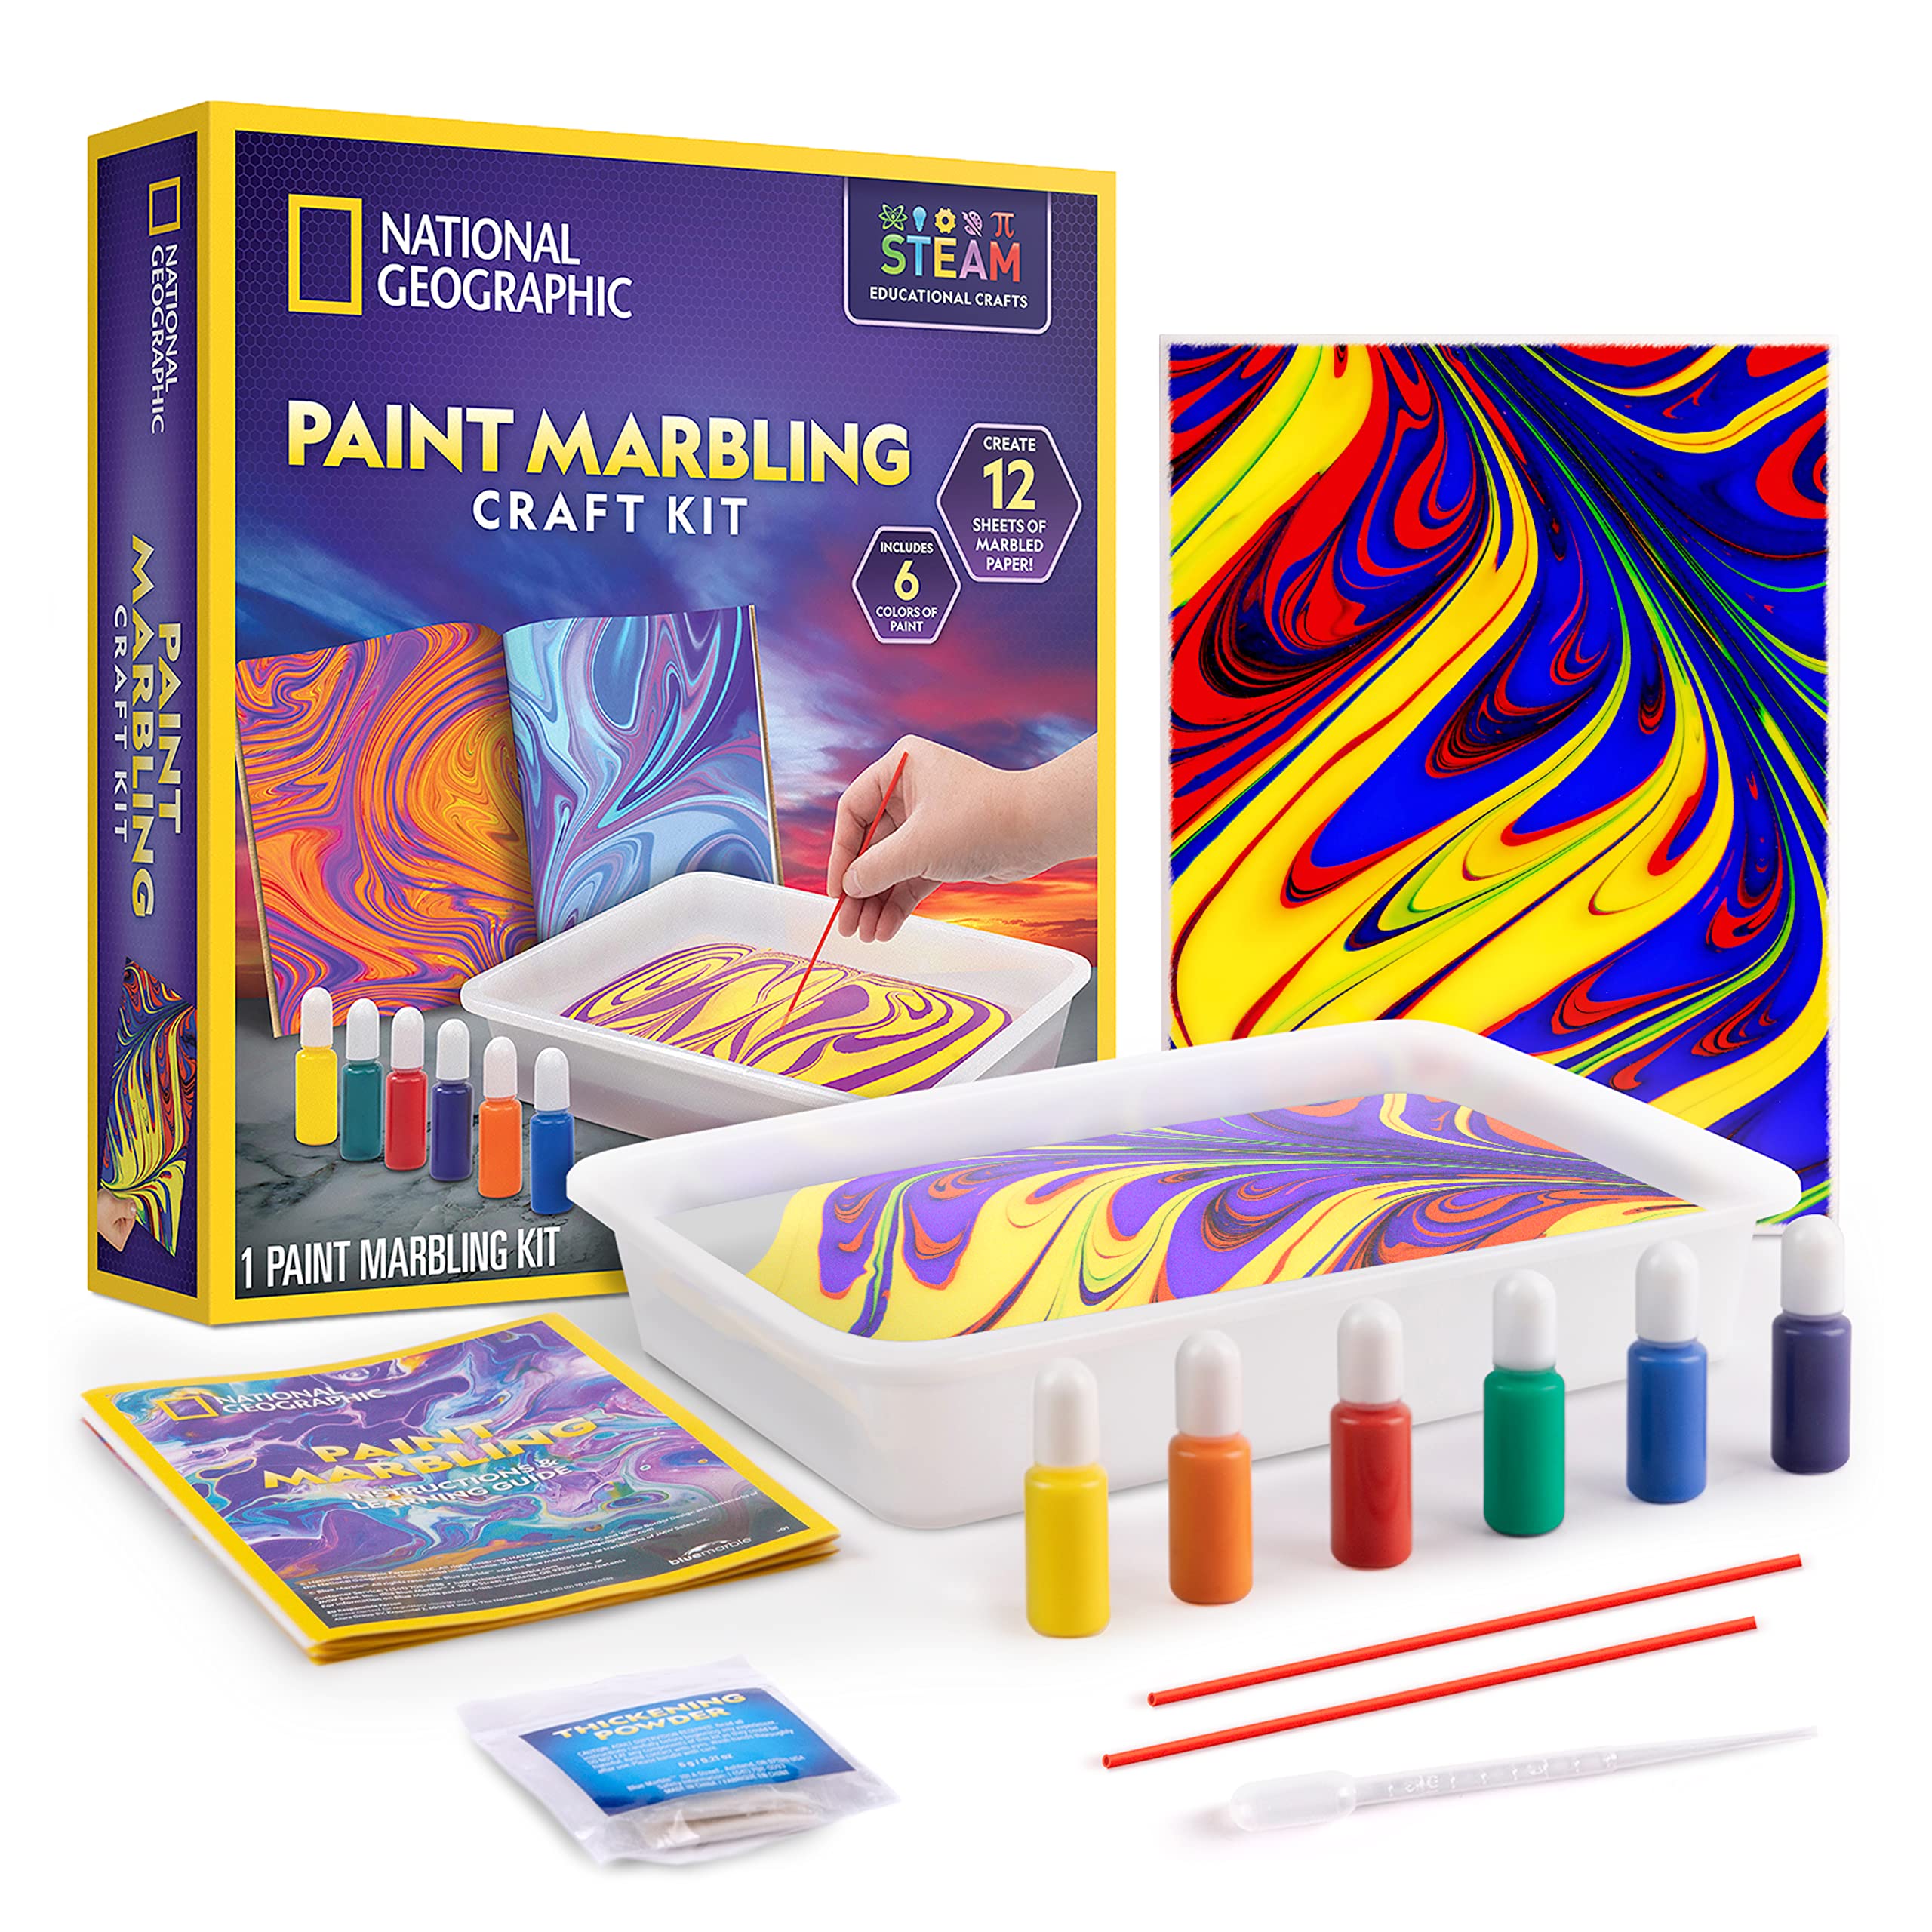 NATIONAL GEOGRAPHIC Paint Marbling Arts & Crafts Kit - Water Marbling Paint Art Kit for Kids, Create 12 Sheets of Marble Art with 6 Paints, Marbling Paint Kit, Kids Art Projects (Amazon Exclusive)